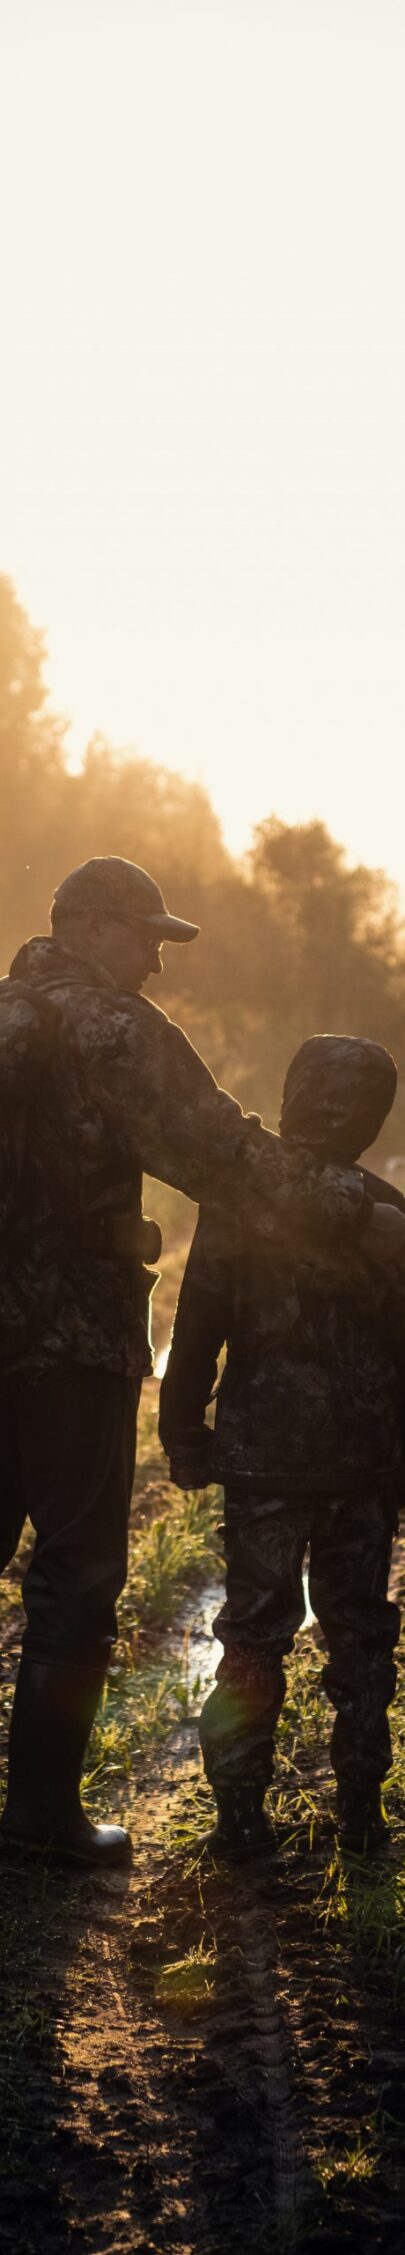 father pointing and guiding son on first deer hunt.